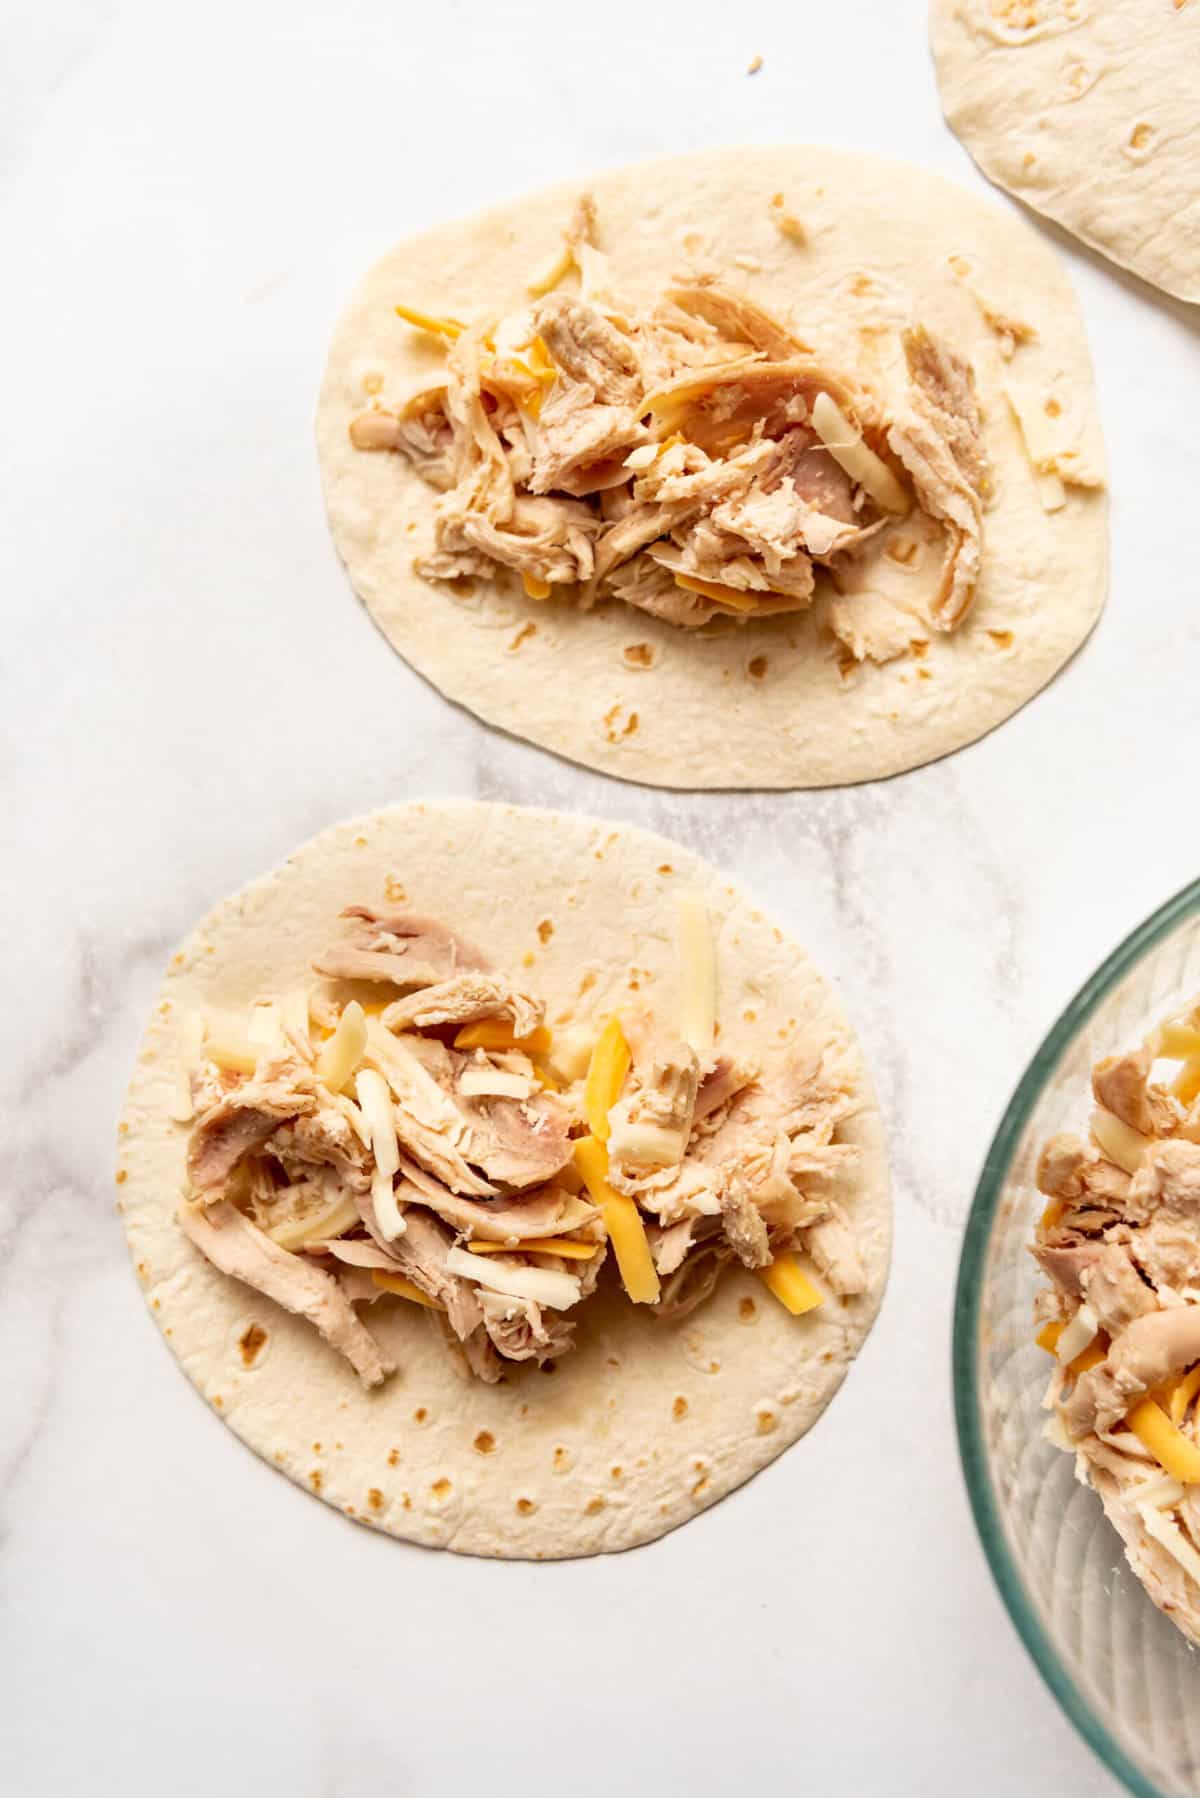 Tortillas piled with shredded chicken and cheese.